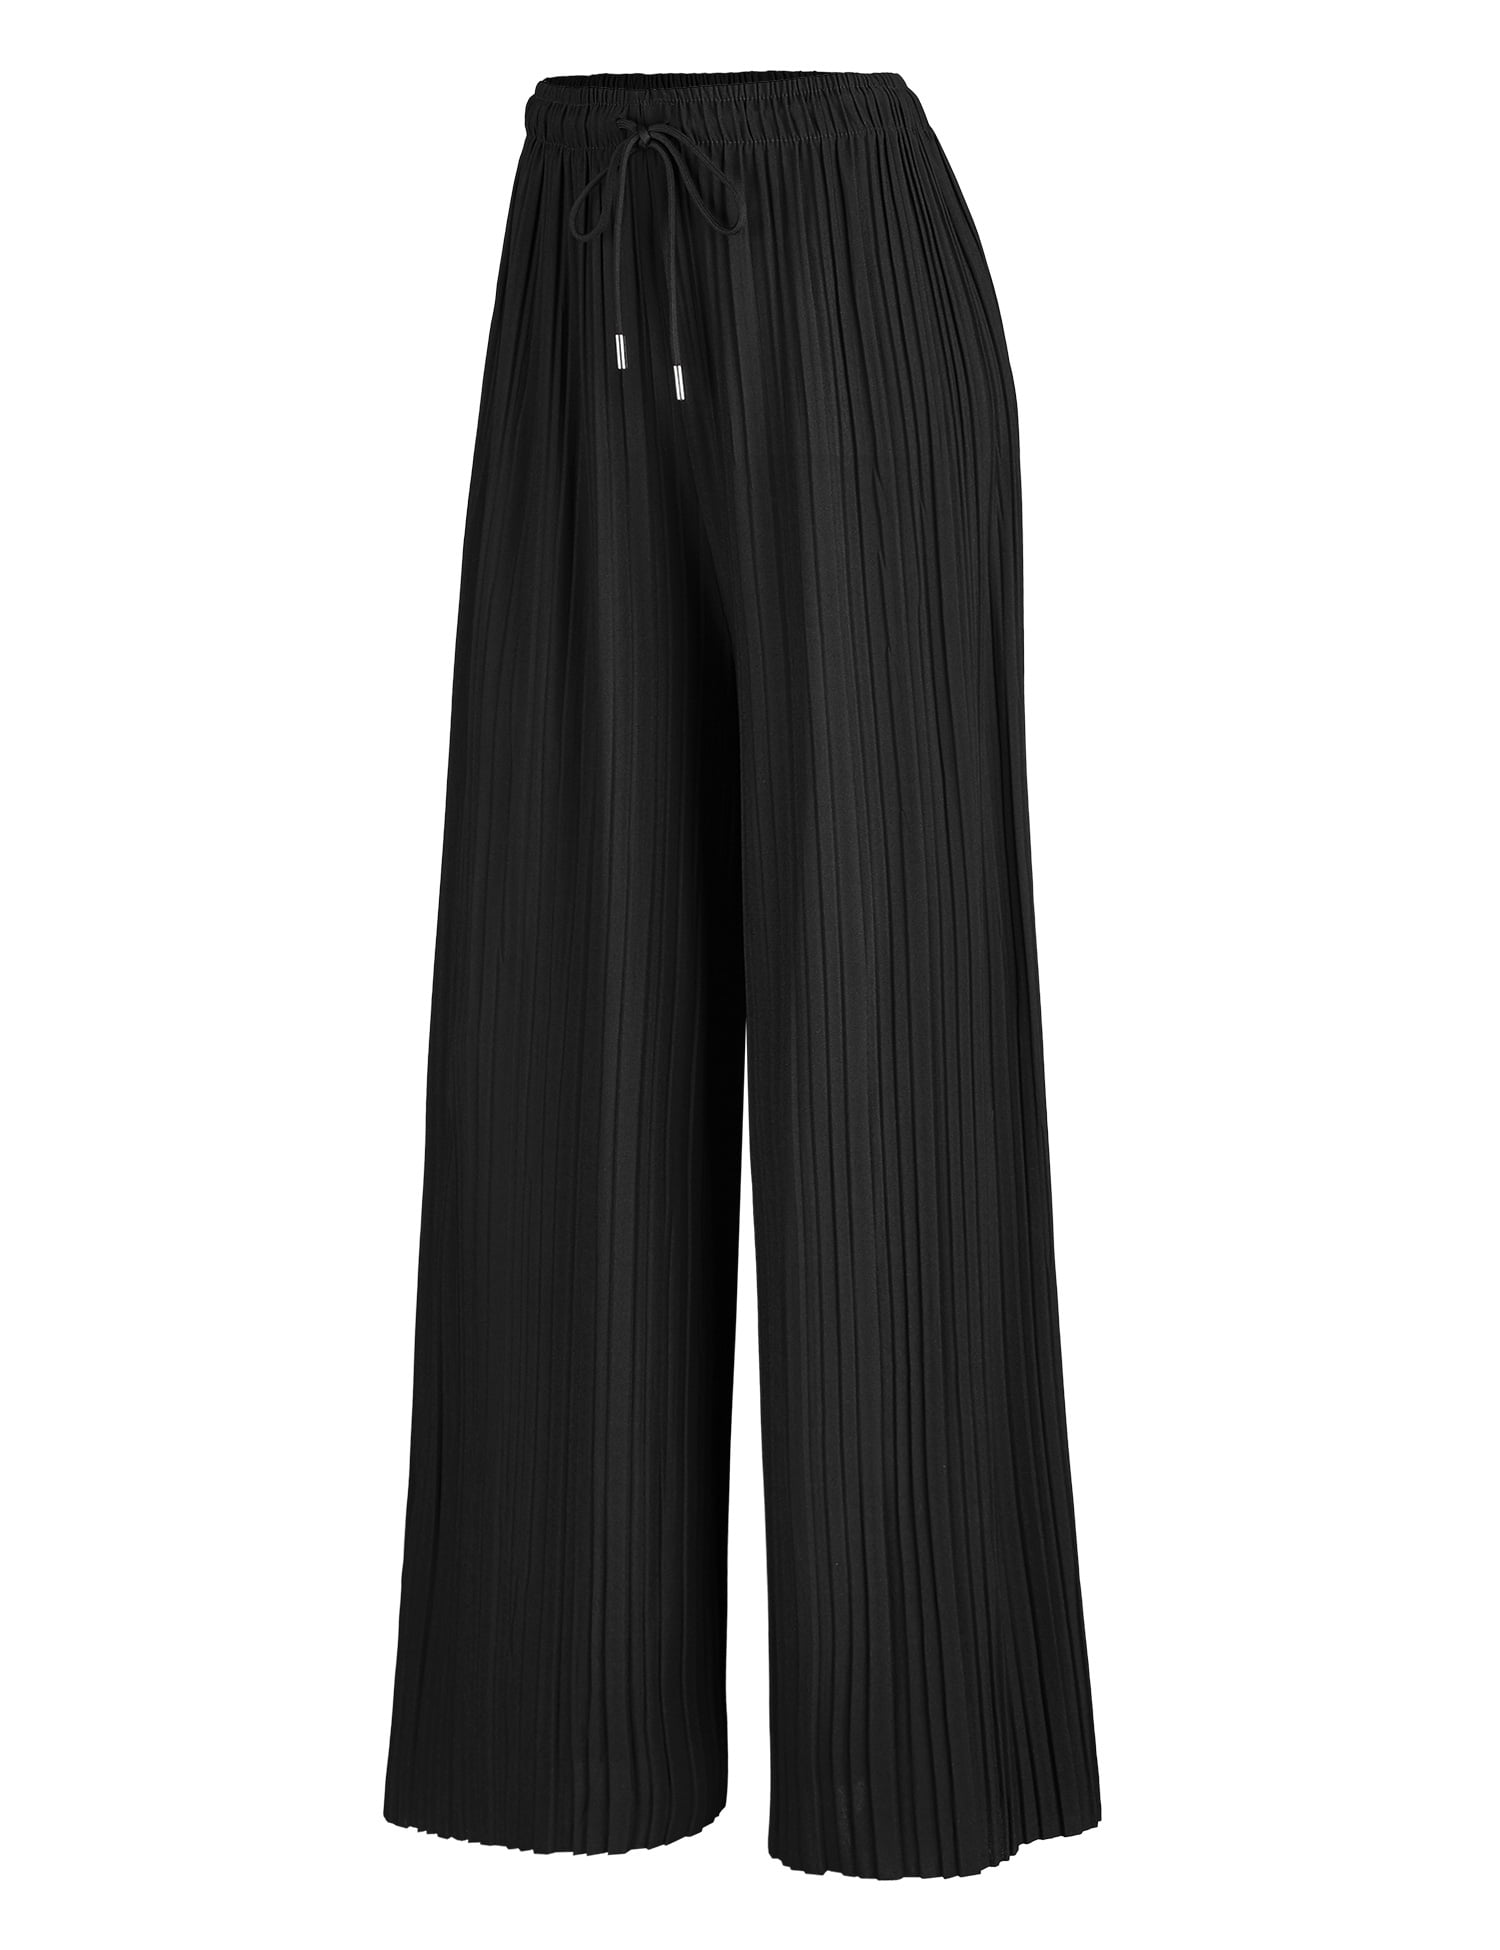 Made by Johnny Women's Pleated Wide Leg Palazzo Pants with Drawstring ...